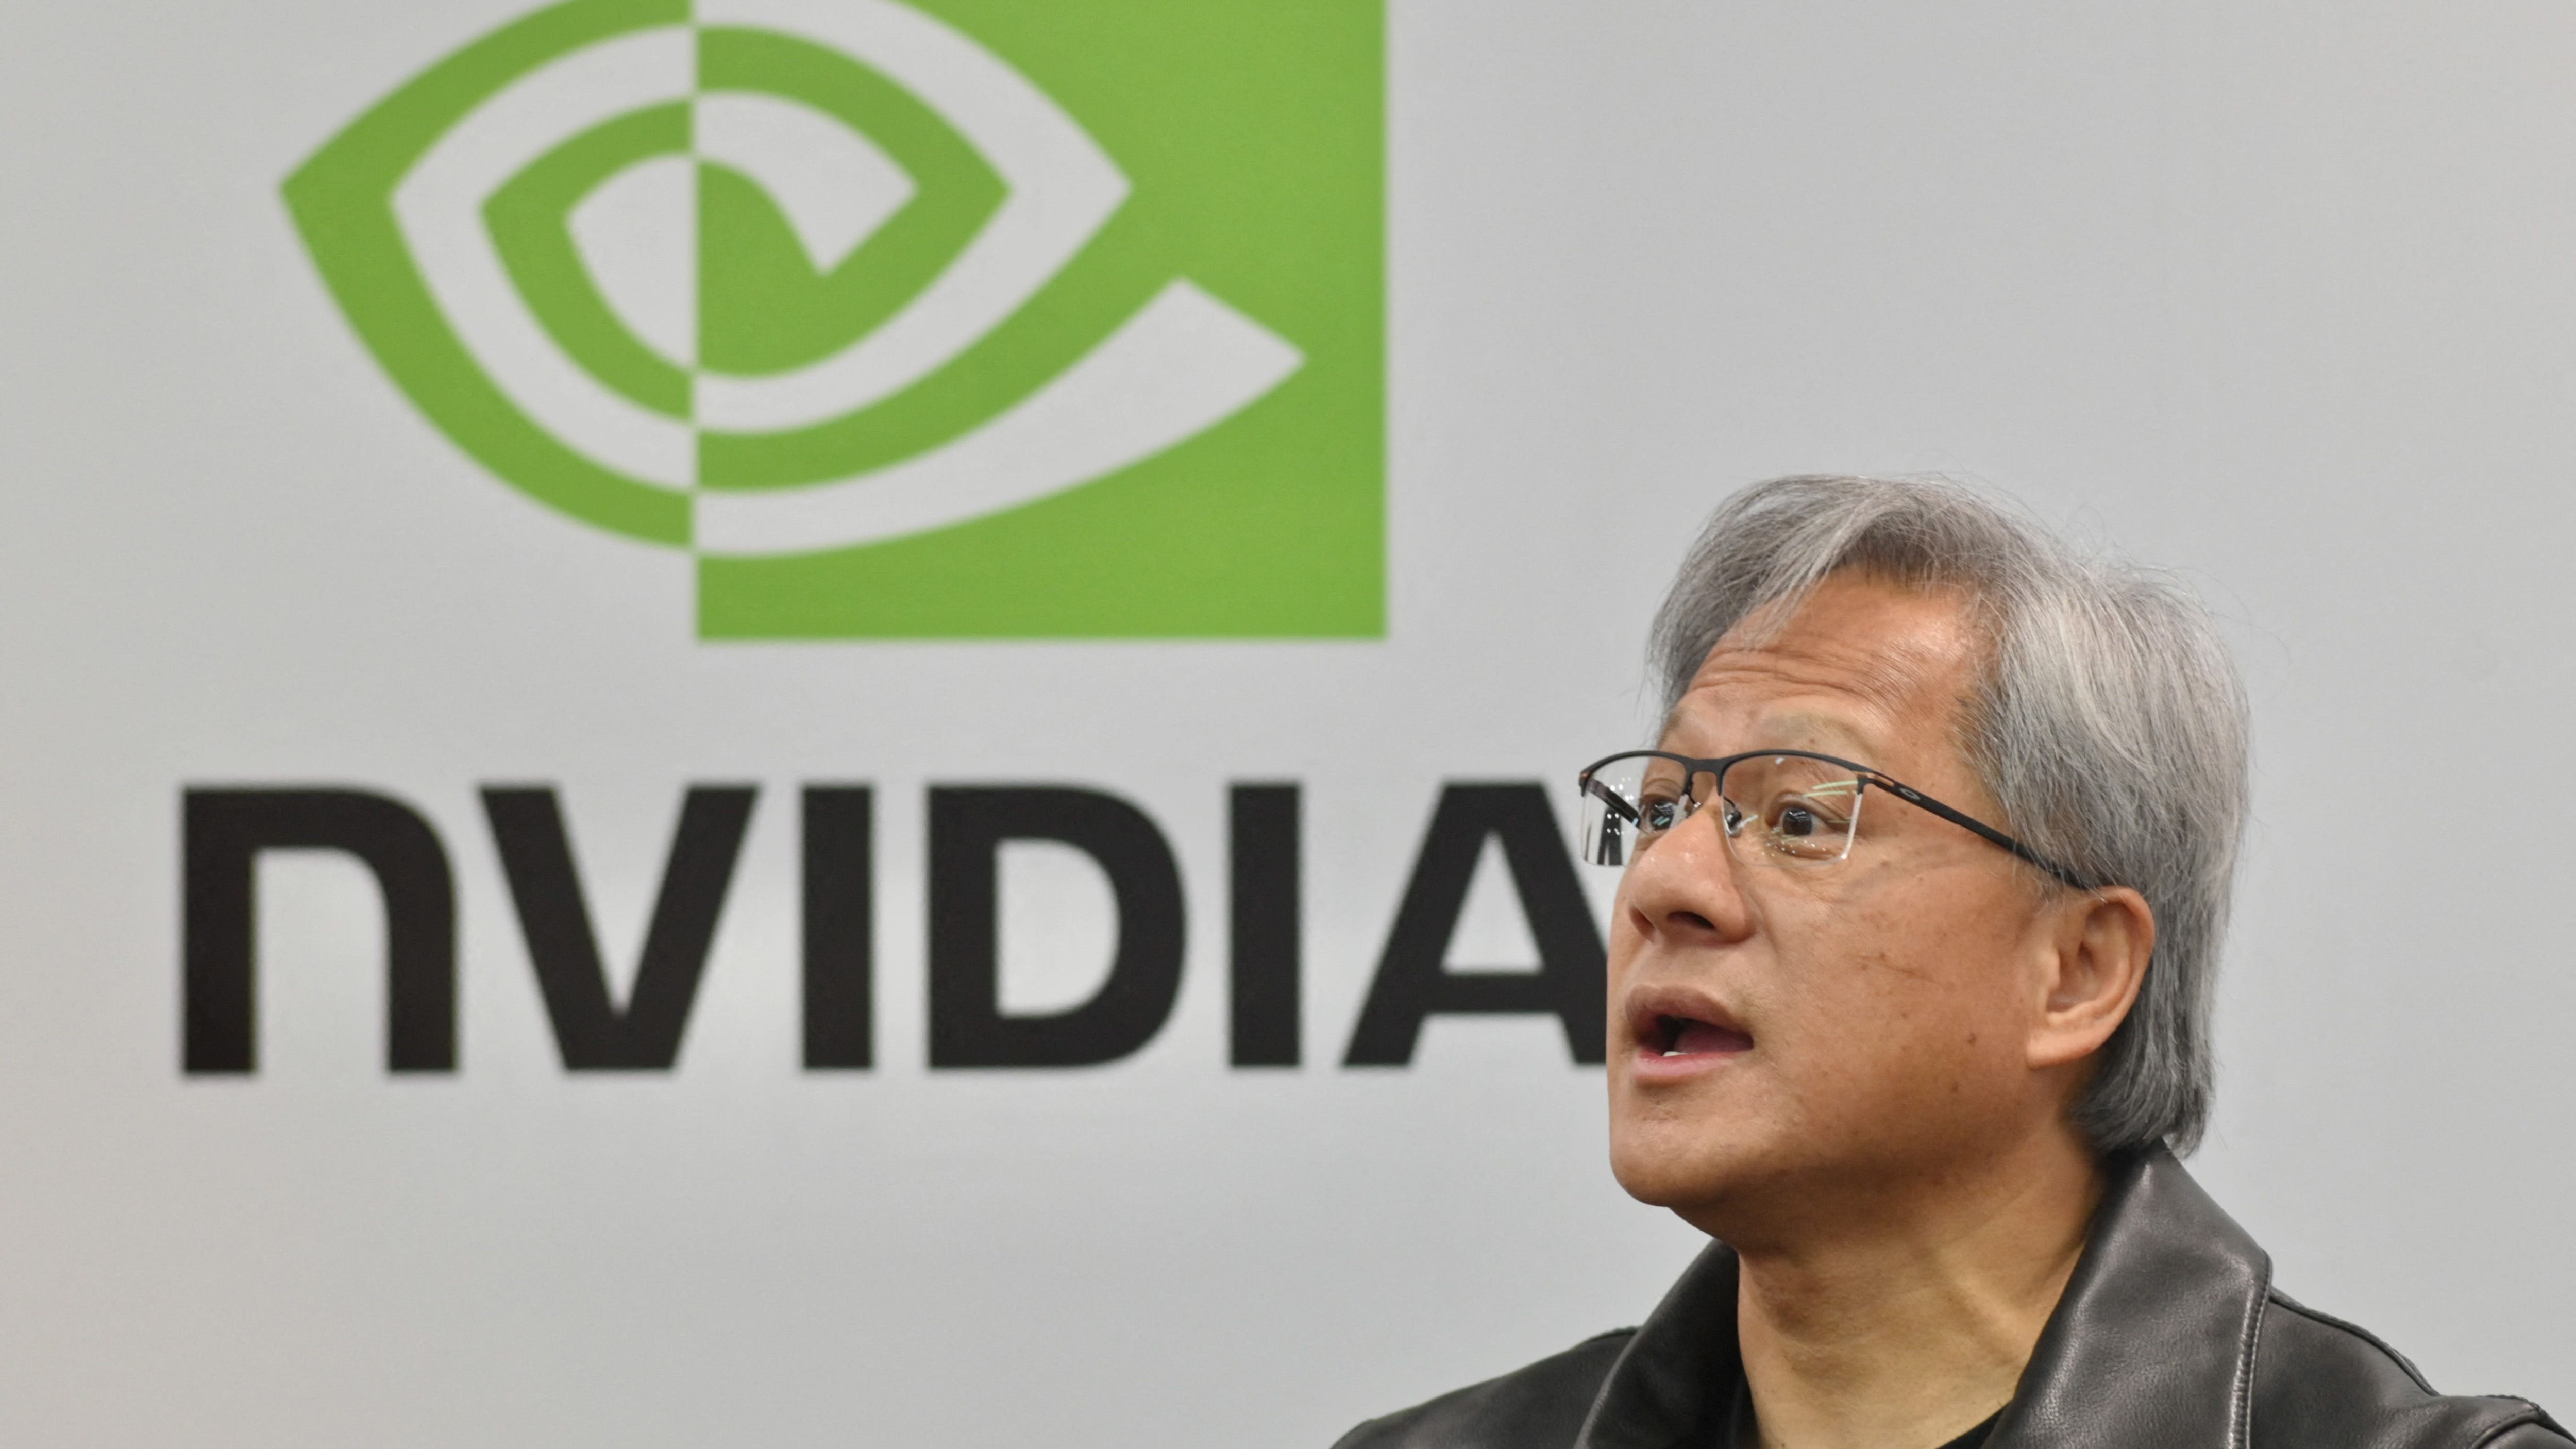 Jensen Huang, CEO of NVIDIA Crop., speaks during a press conference at the Computex 2023 in Taipei on May 30, 2023. (Photo by Sam Yeh / AFP)